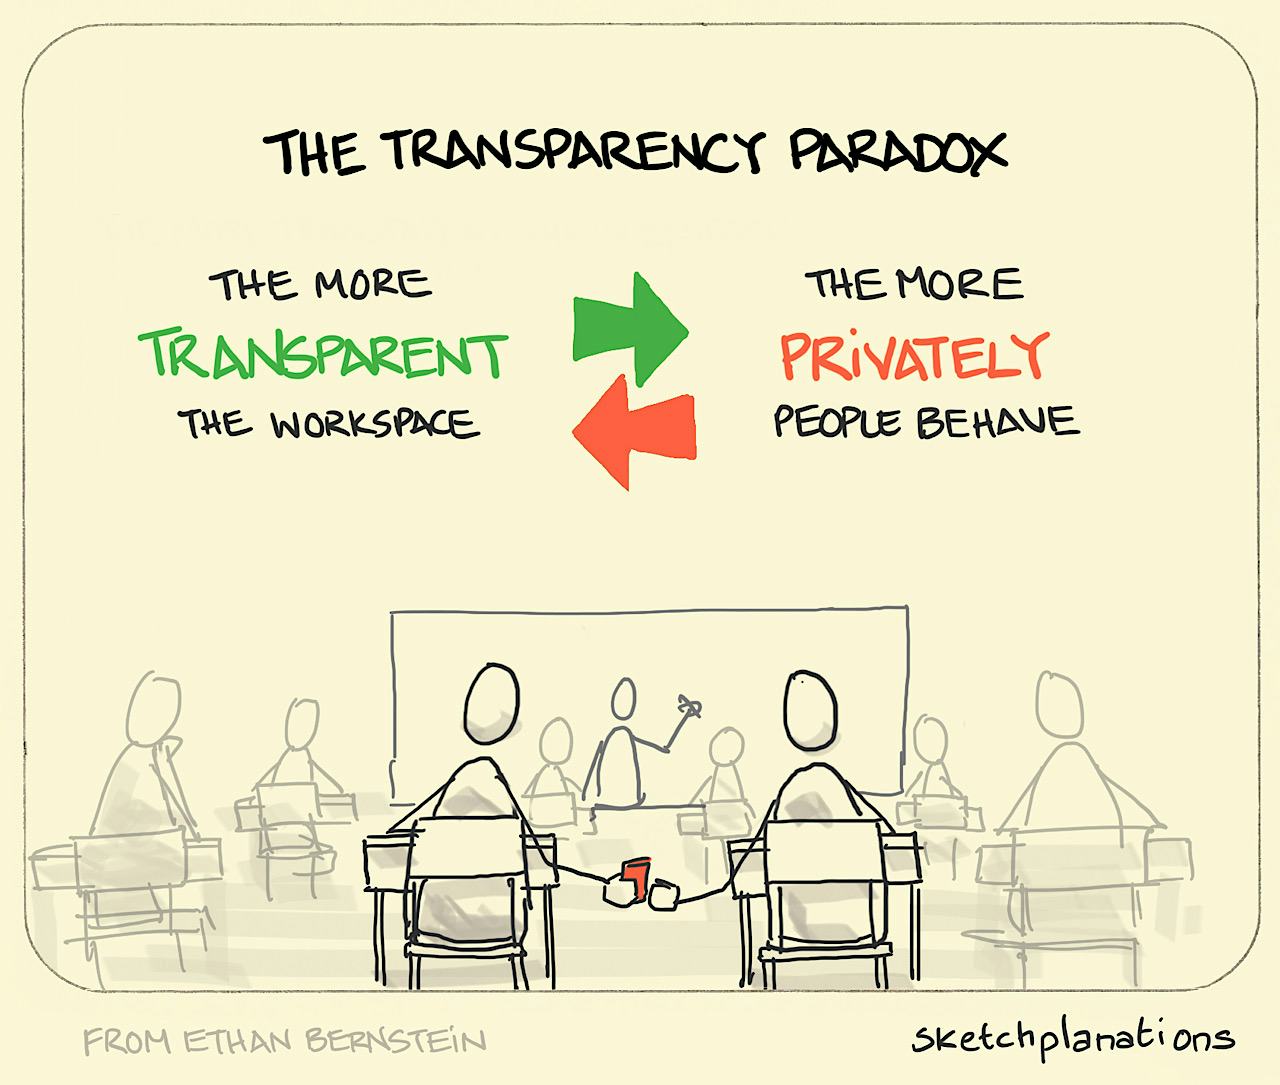 The transparency paradox: In an open classroom one student secretly passes a note to the other illustrating the transparency paradox